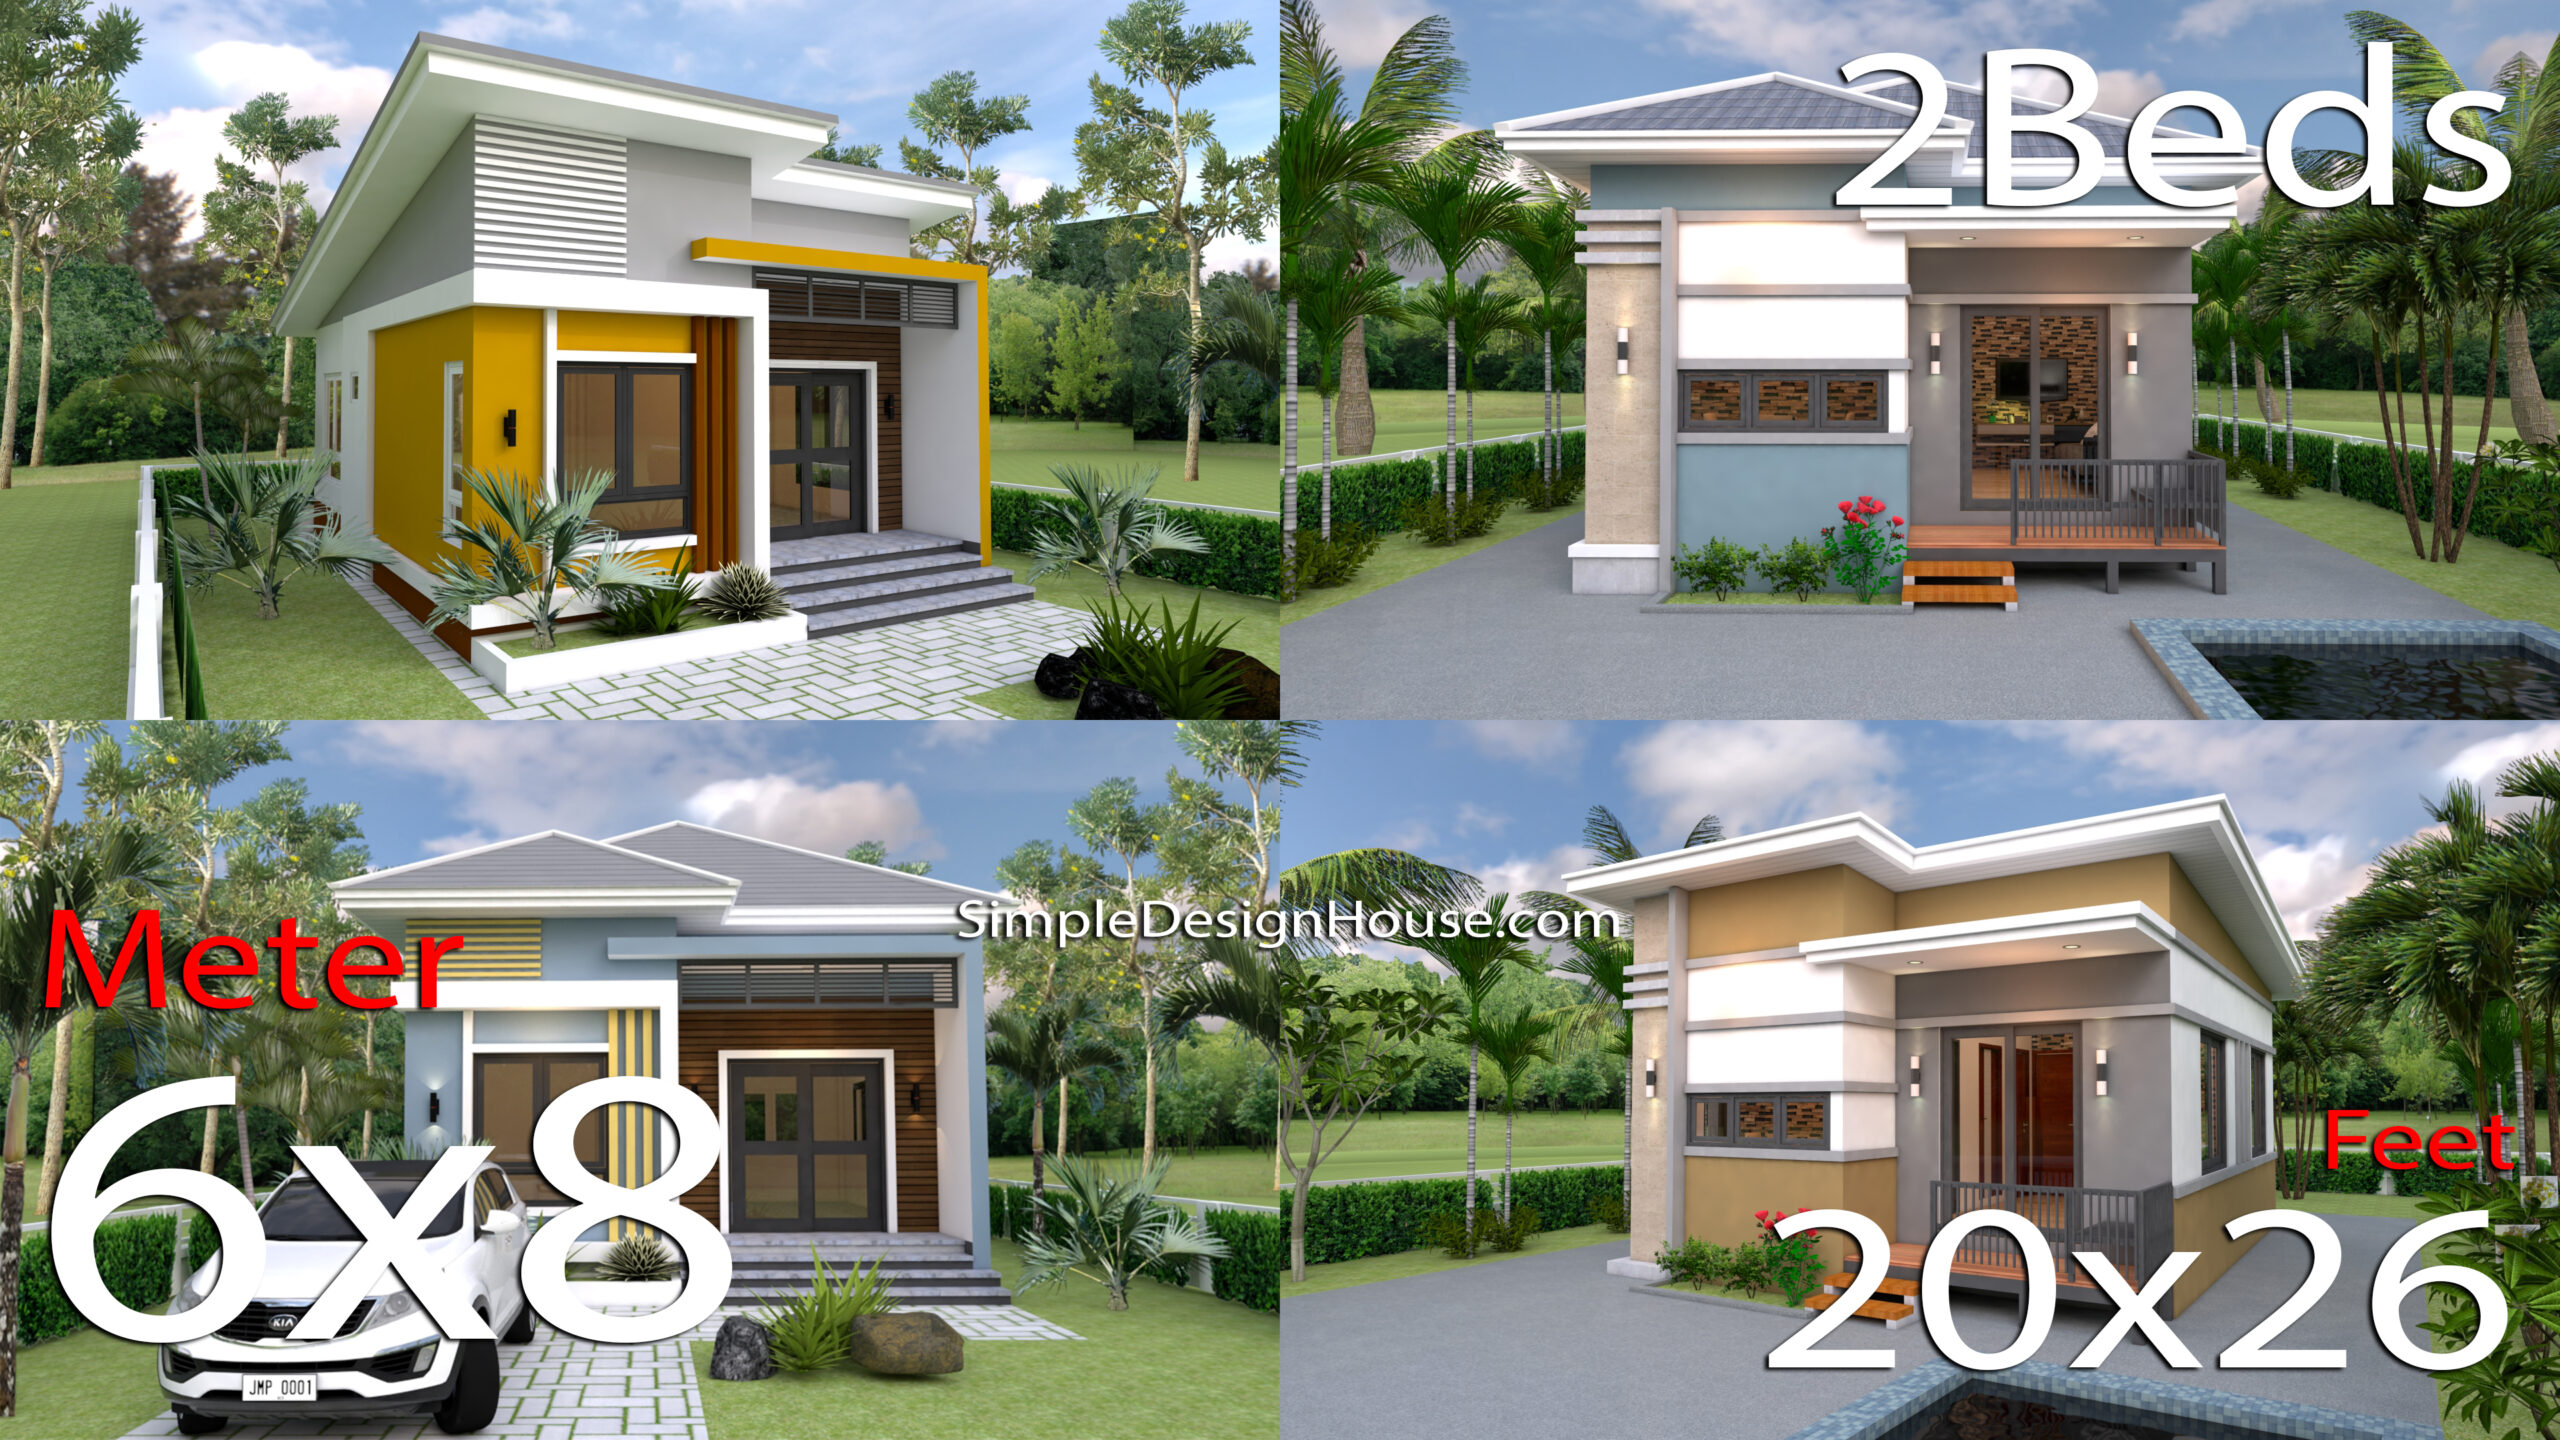 7 Best 2 Beds House Plans 6x8 You Will love